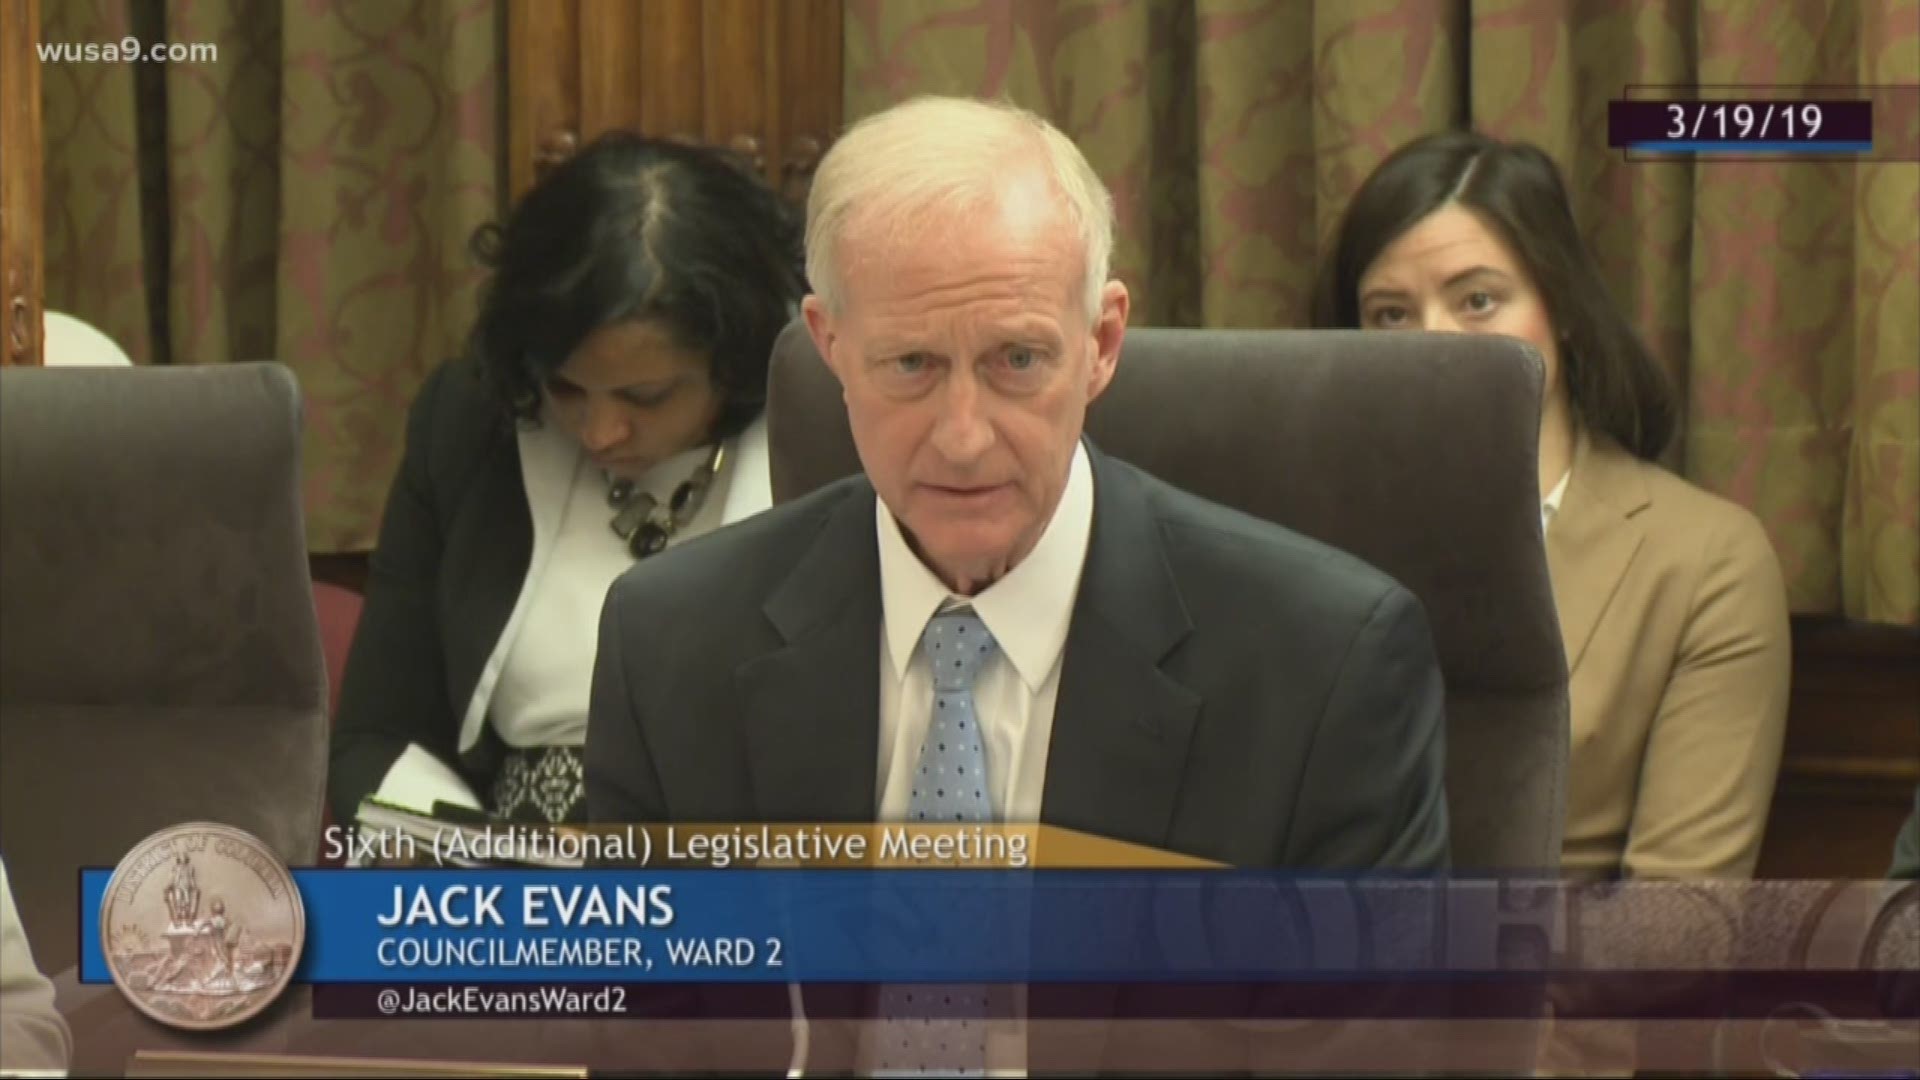 By unanimous vote, the DC Council agreed to reprimand its longest serving member, councilman Jack Evans.